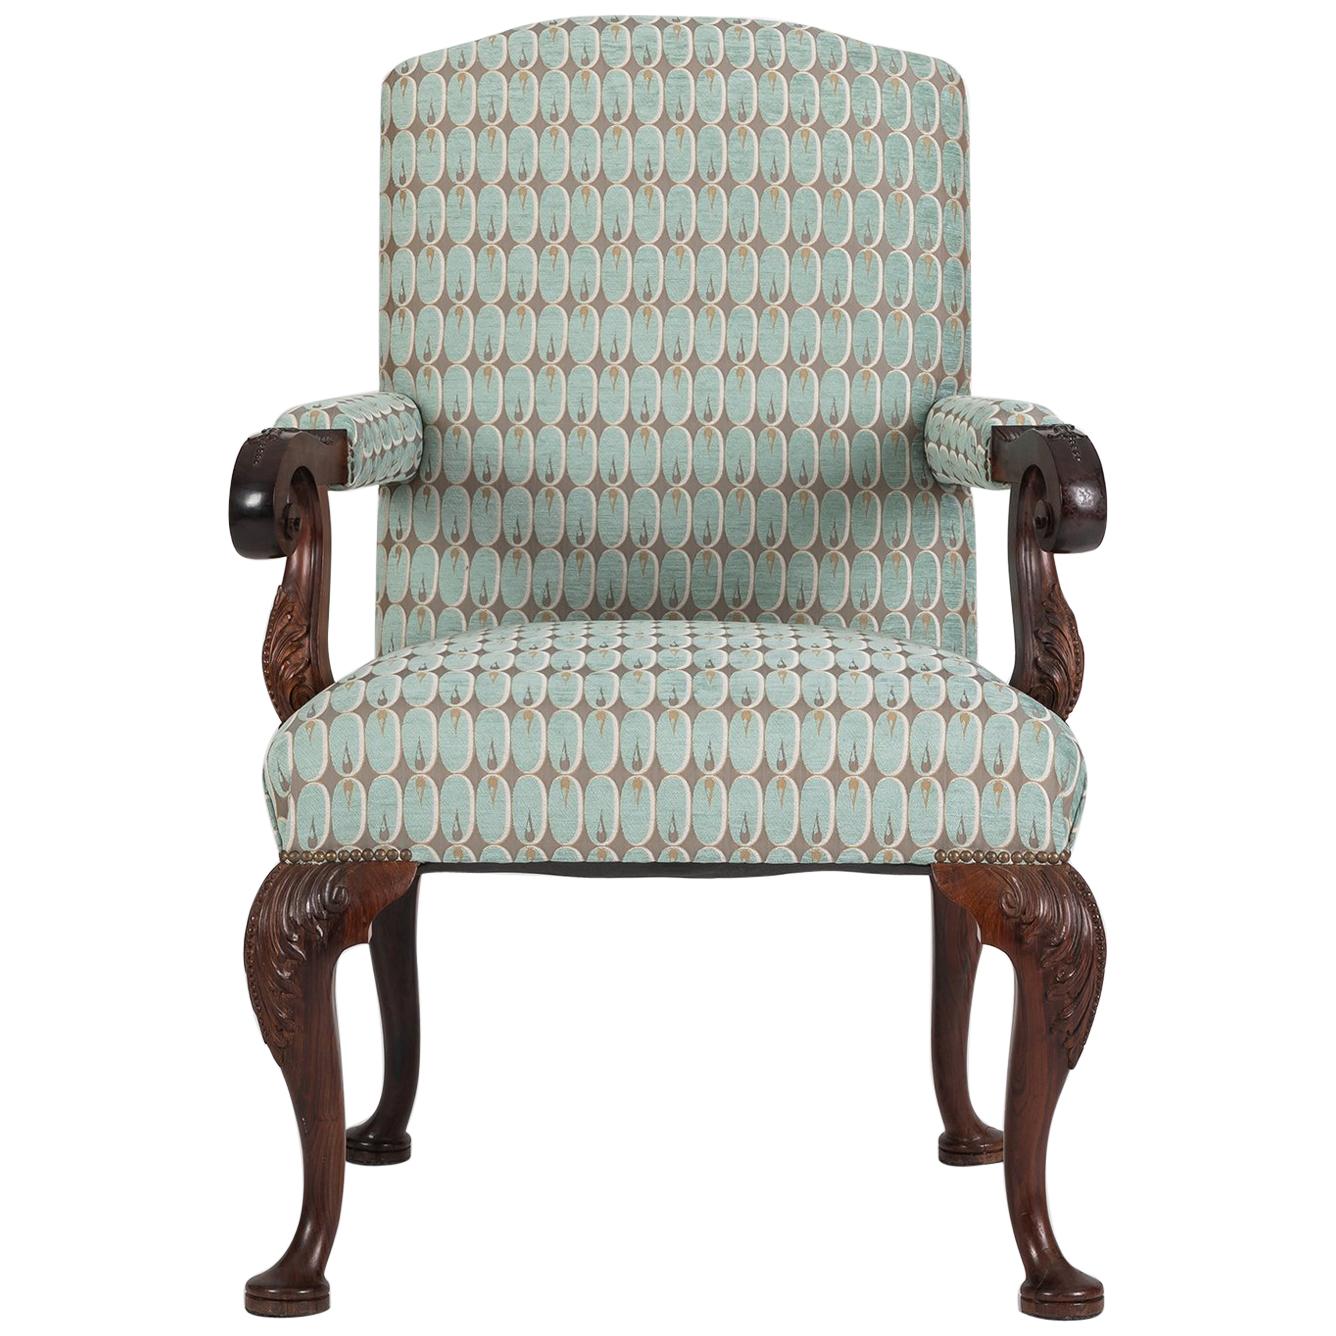 Hand Carved English Georgian Style Armchair in Kravet Fabric, Late 19th Century For Sale